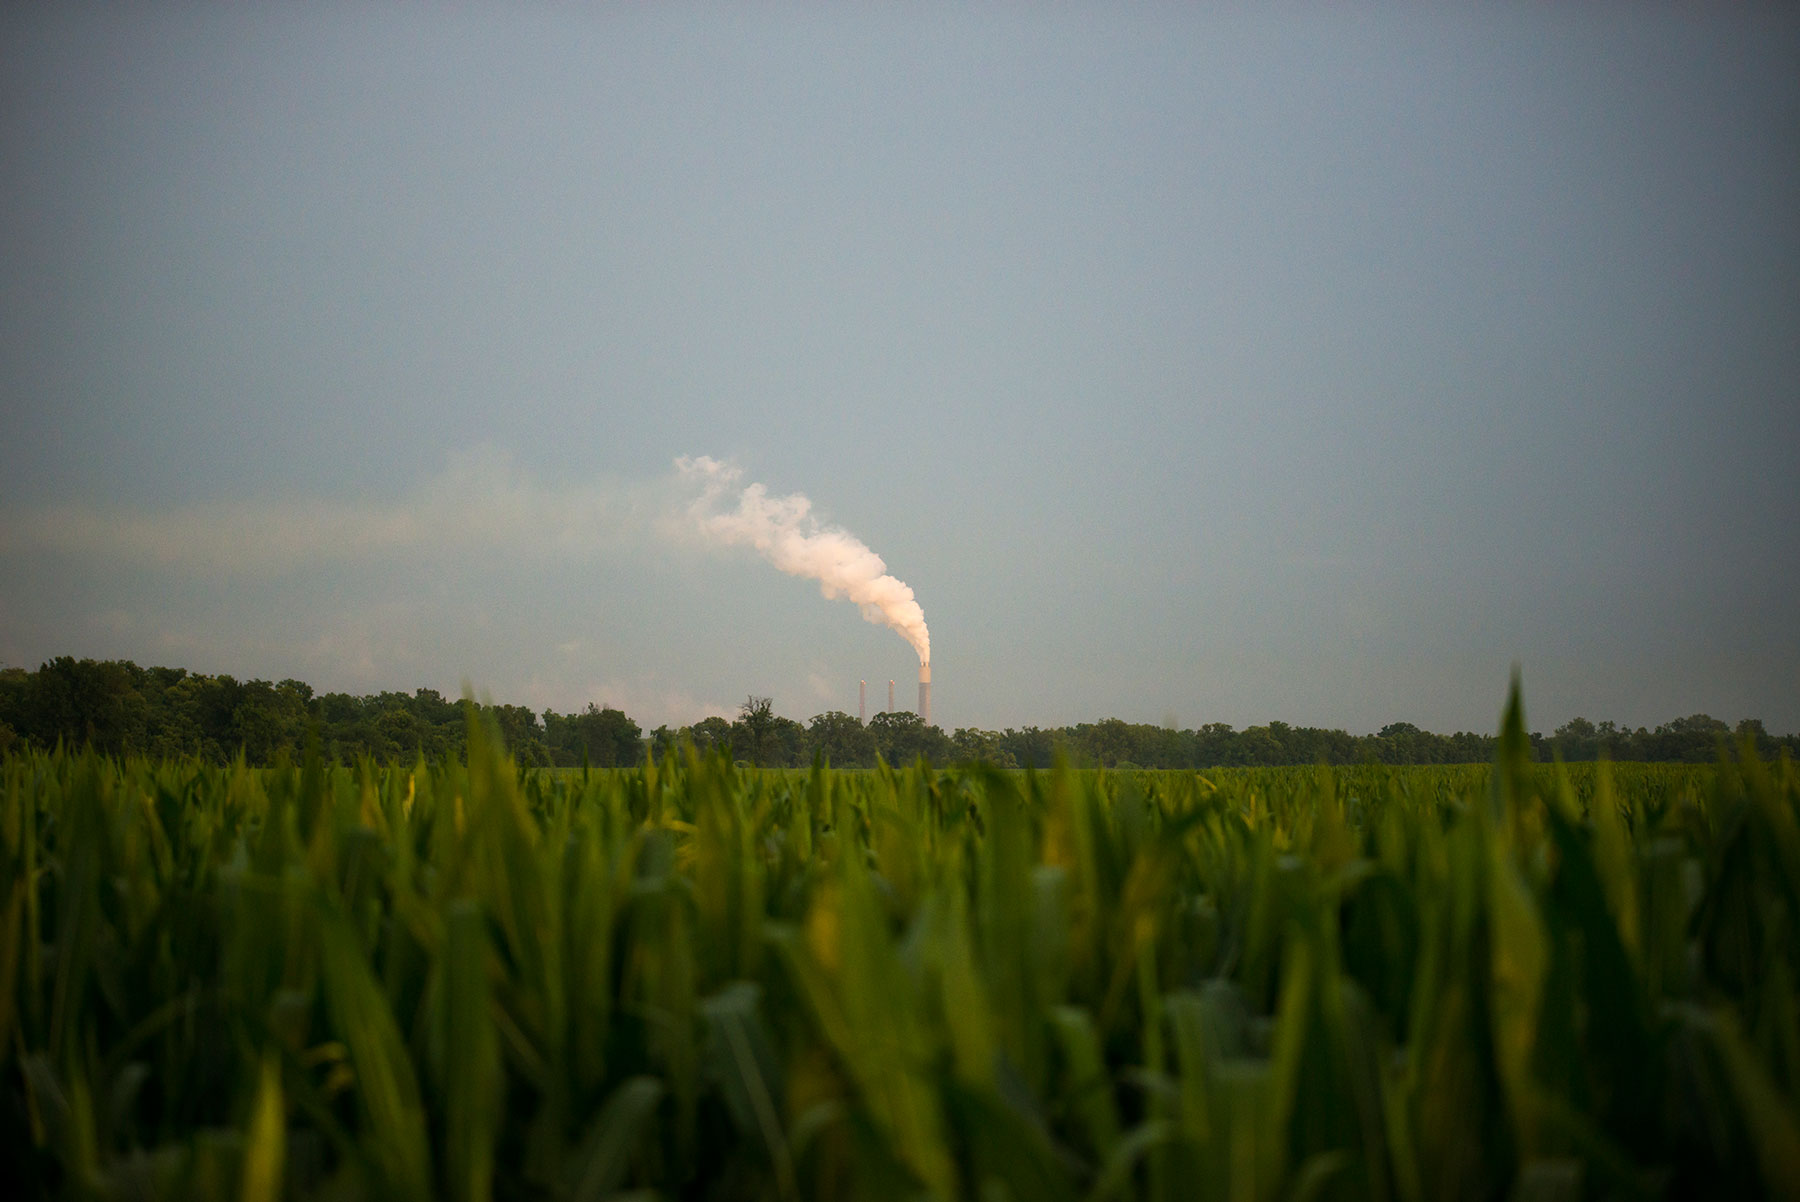 An industrial plant puffs out smoke in Newport, Indiana. It’s the town’s primary employer, but the decline of industry and regulations on coal here have greatly decreased the town’s population and have hit its economy. (Roman Knertser/News21)